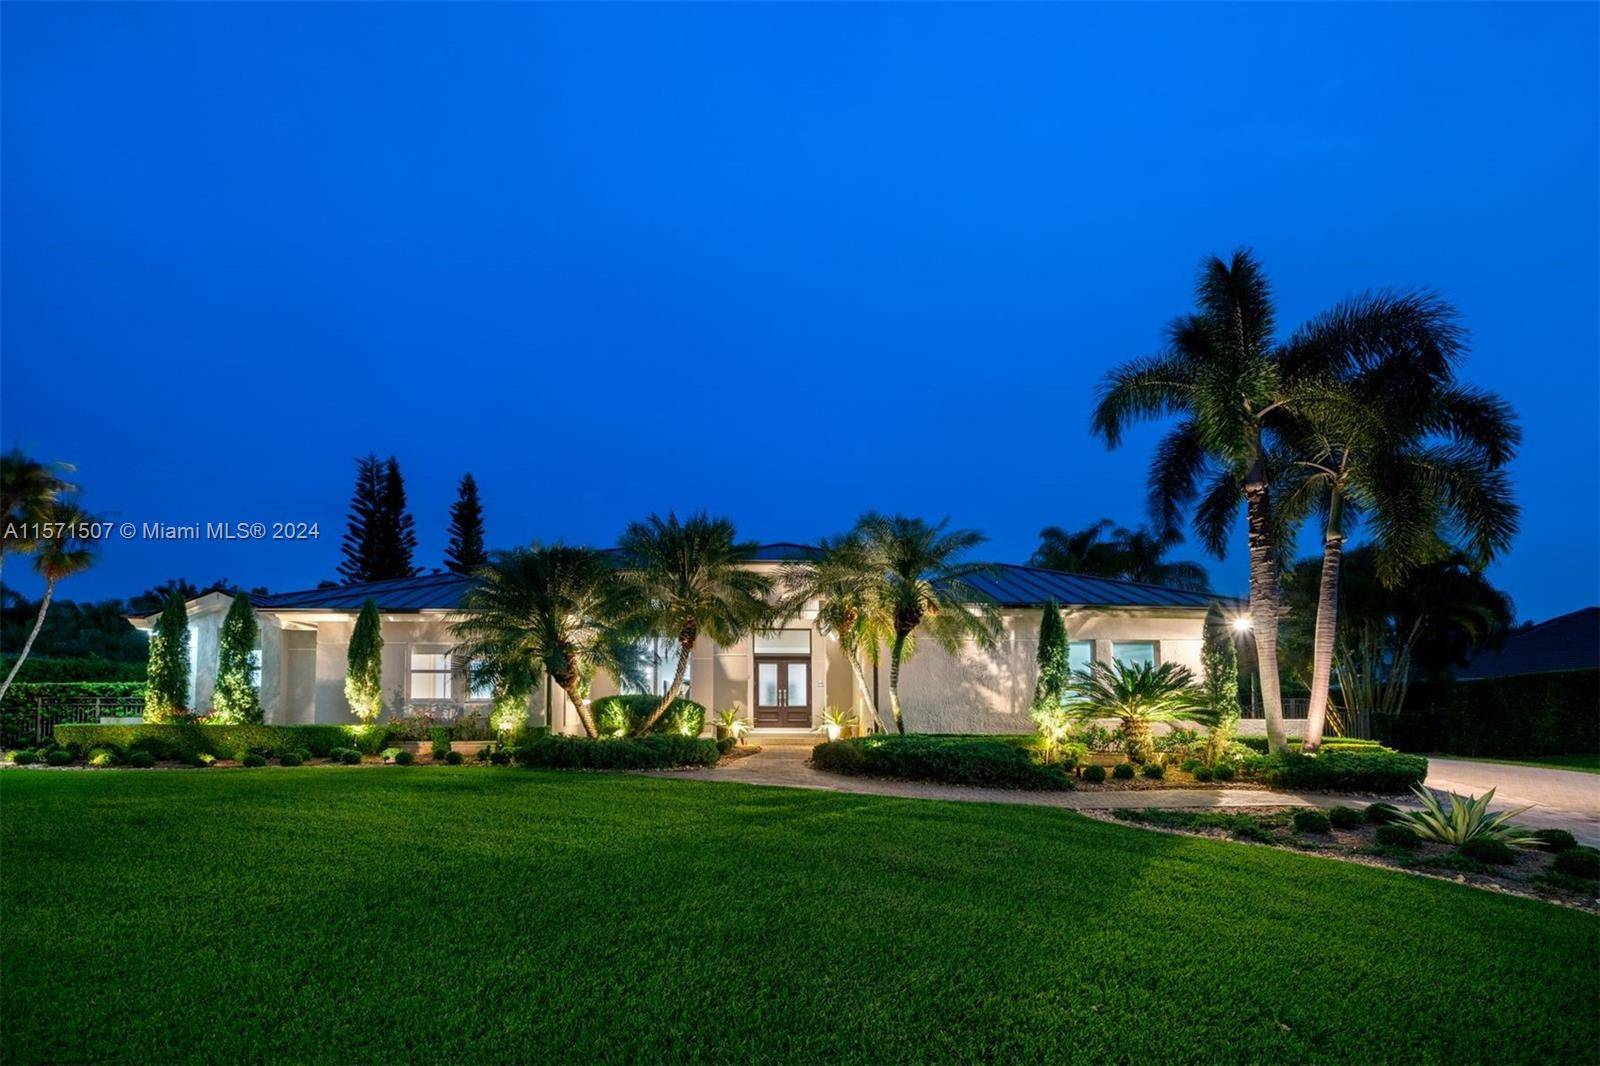 Nestled in the Palmetto Bay gated community of Flamingo Garden Estates, this 6 bedroom, 4 bath estate boasts 4, 496 SF on a nearly half acre lot.